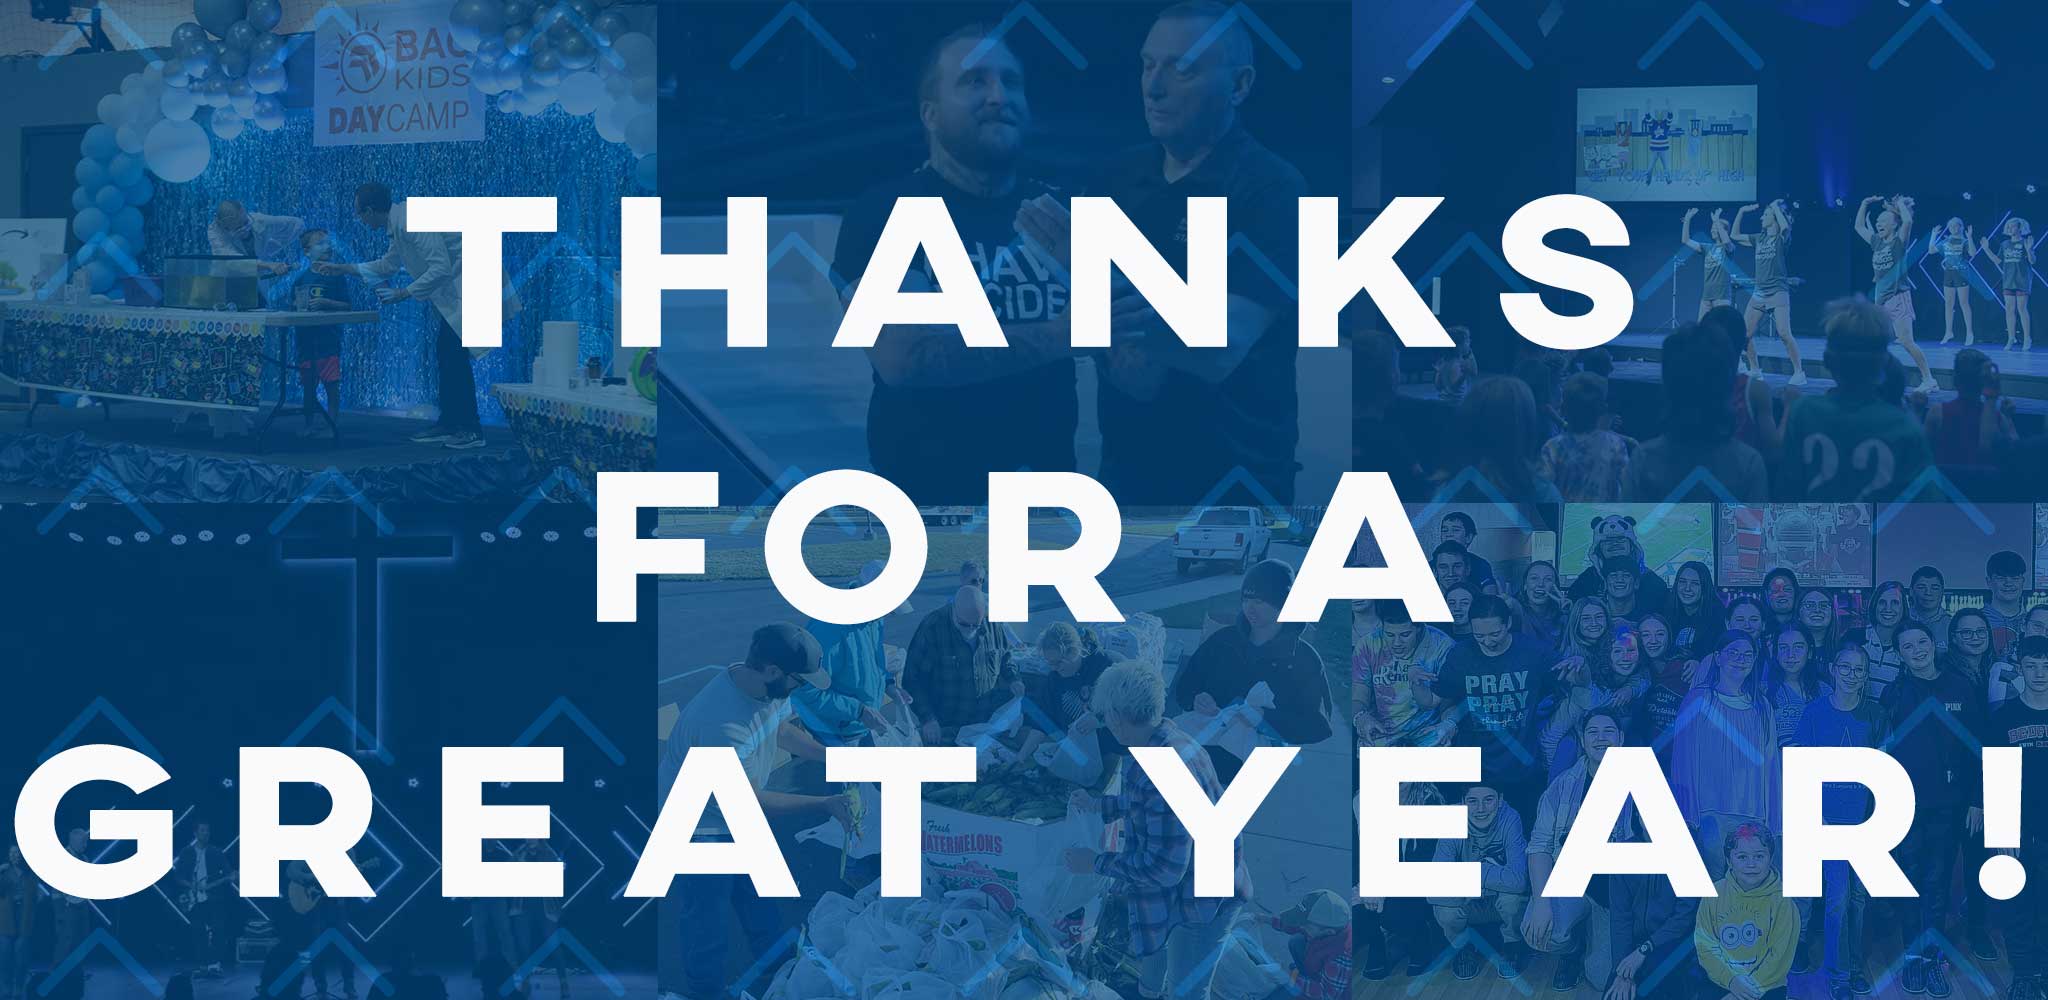 Thank you for a great year!